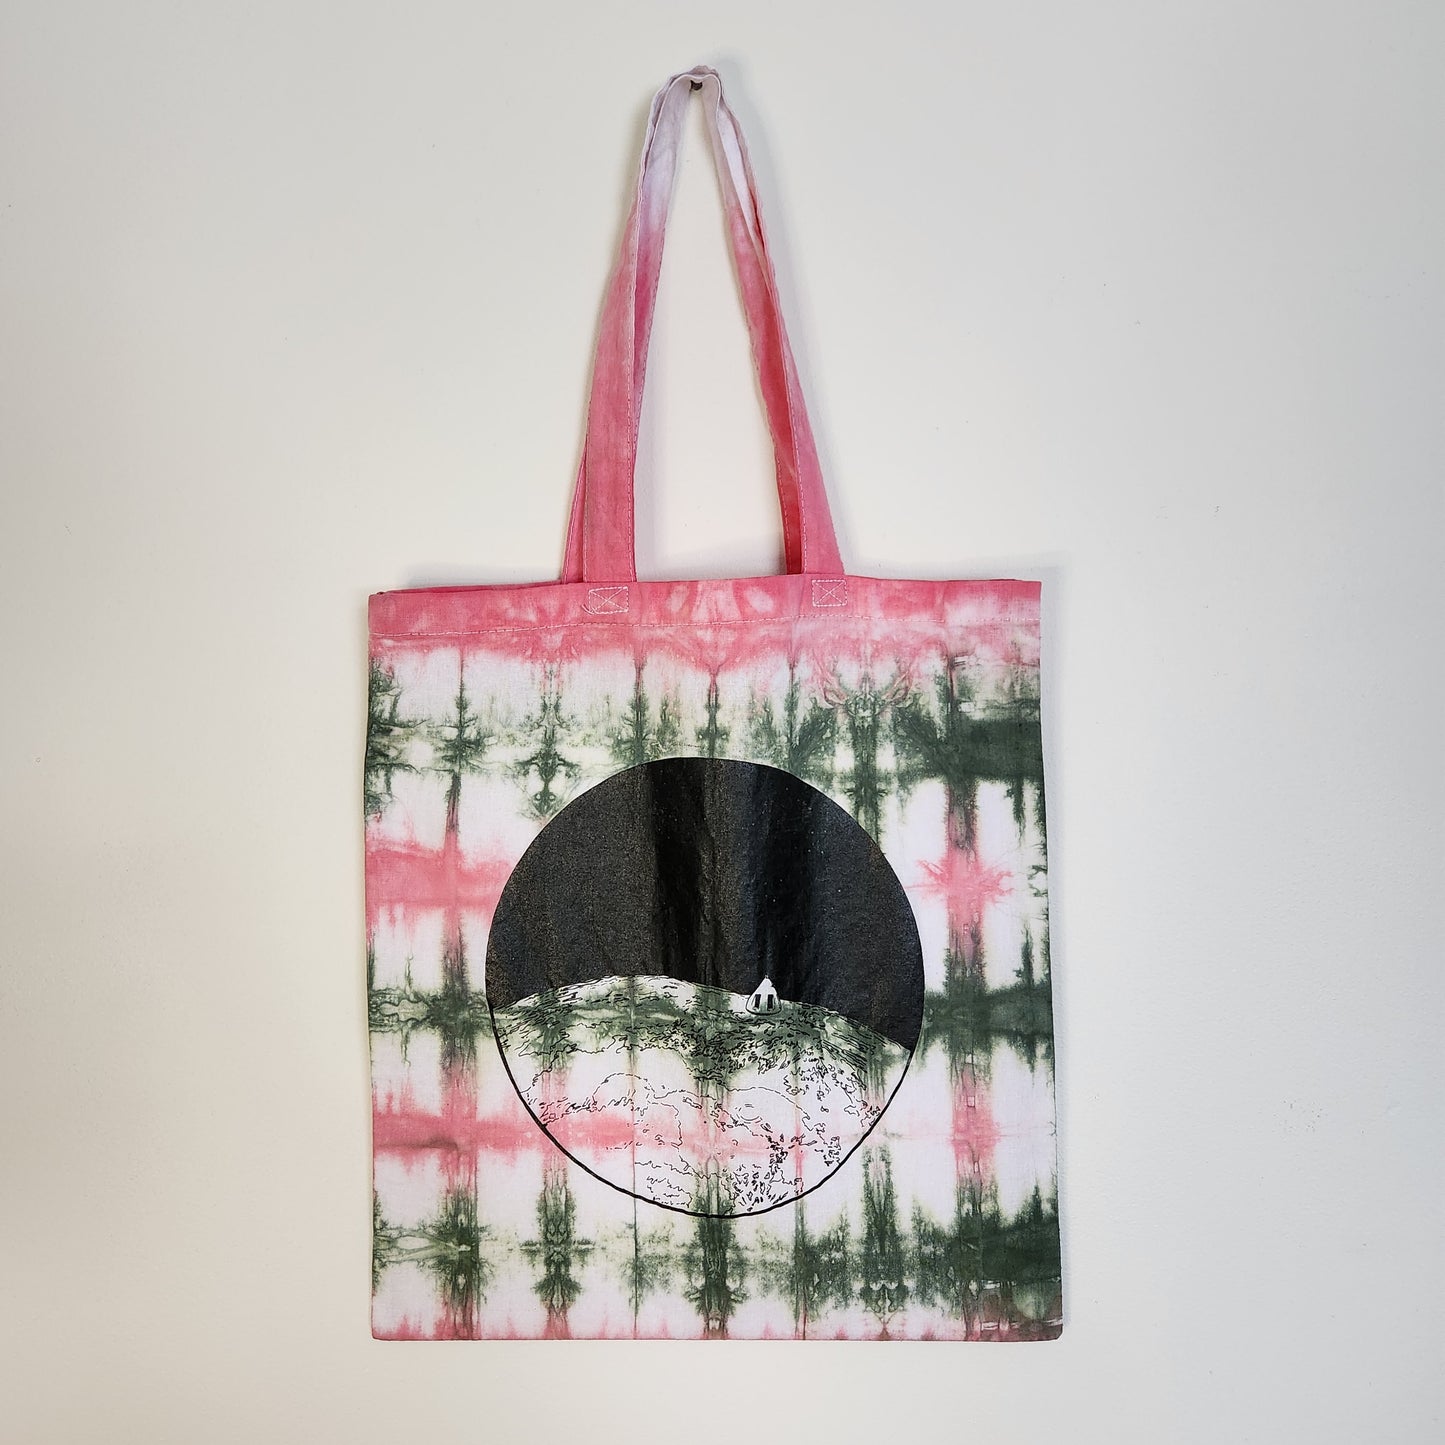 Tie Dye Totes - Limited Edition